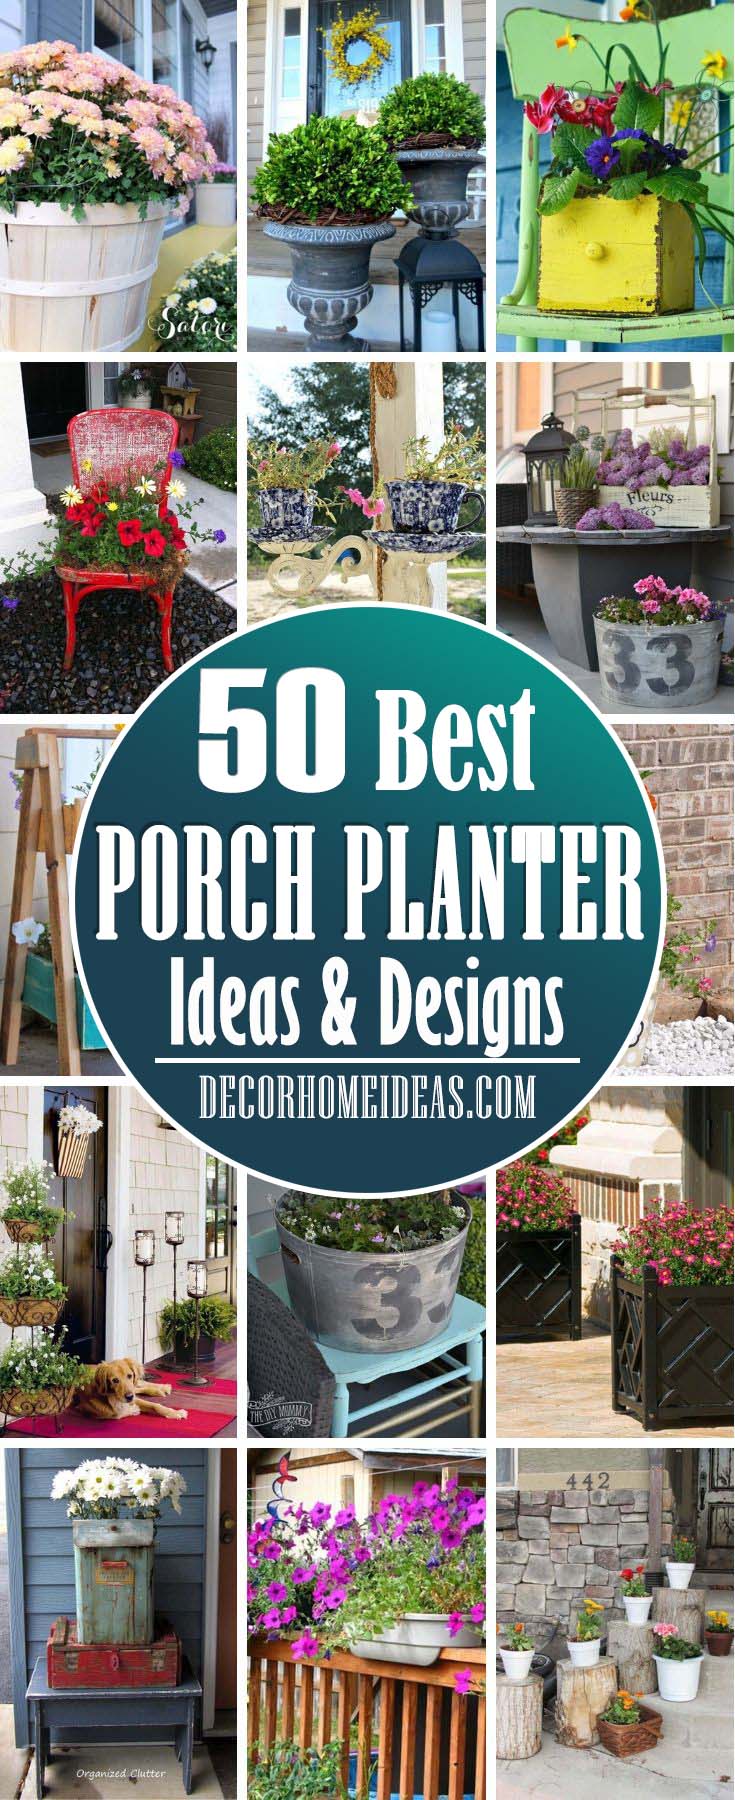  Charming Porch Planter Ideas To Boost Your Curb Appeal Decor Home Ideas